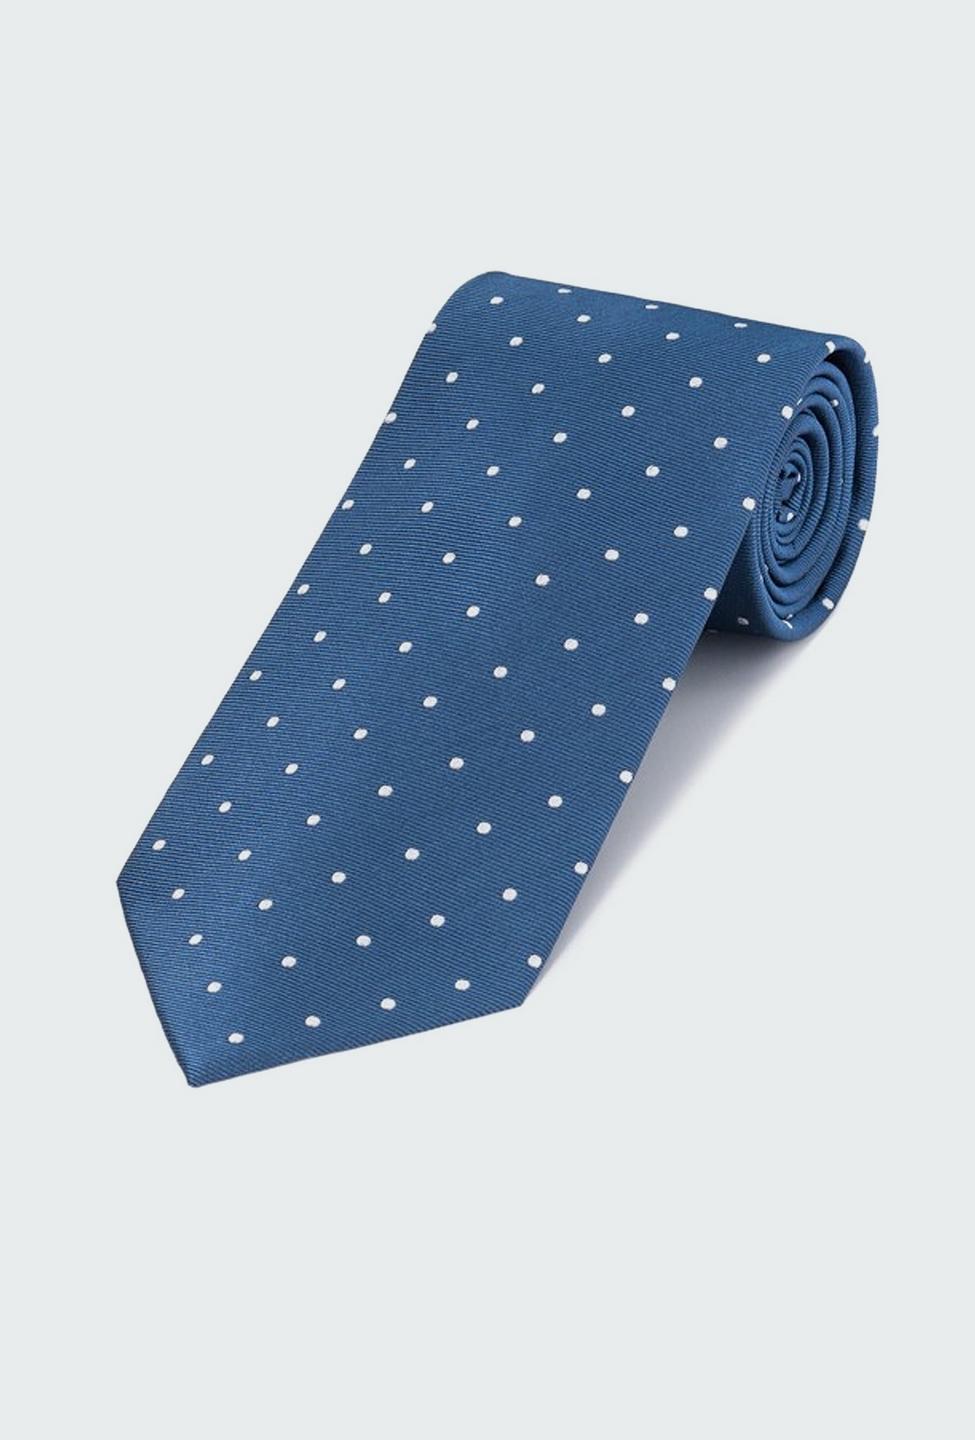 Blue tie - Pattern Design from Indochino Collection